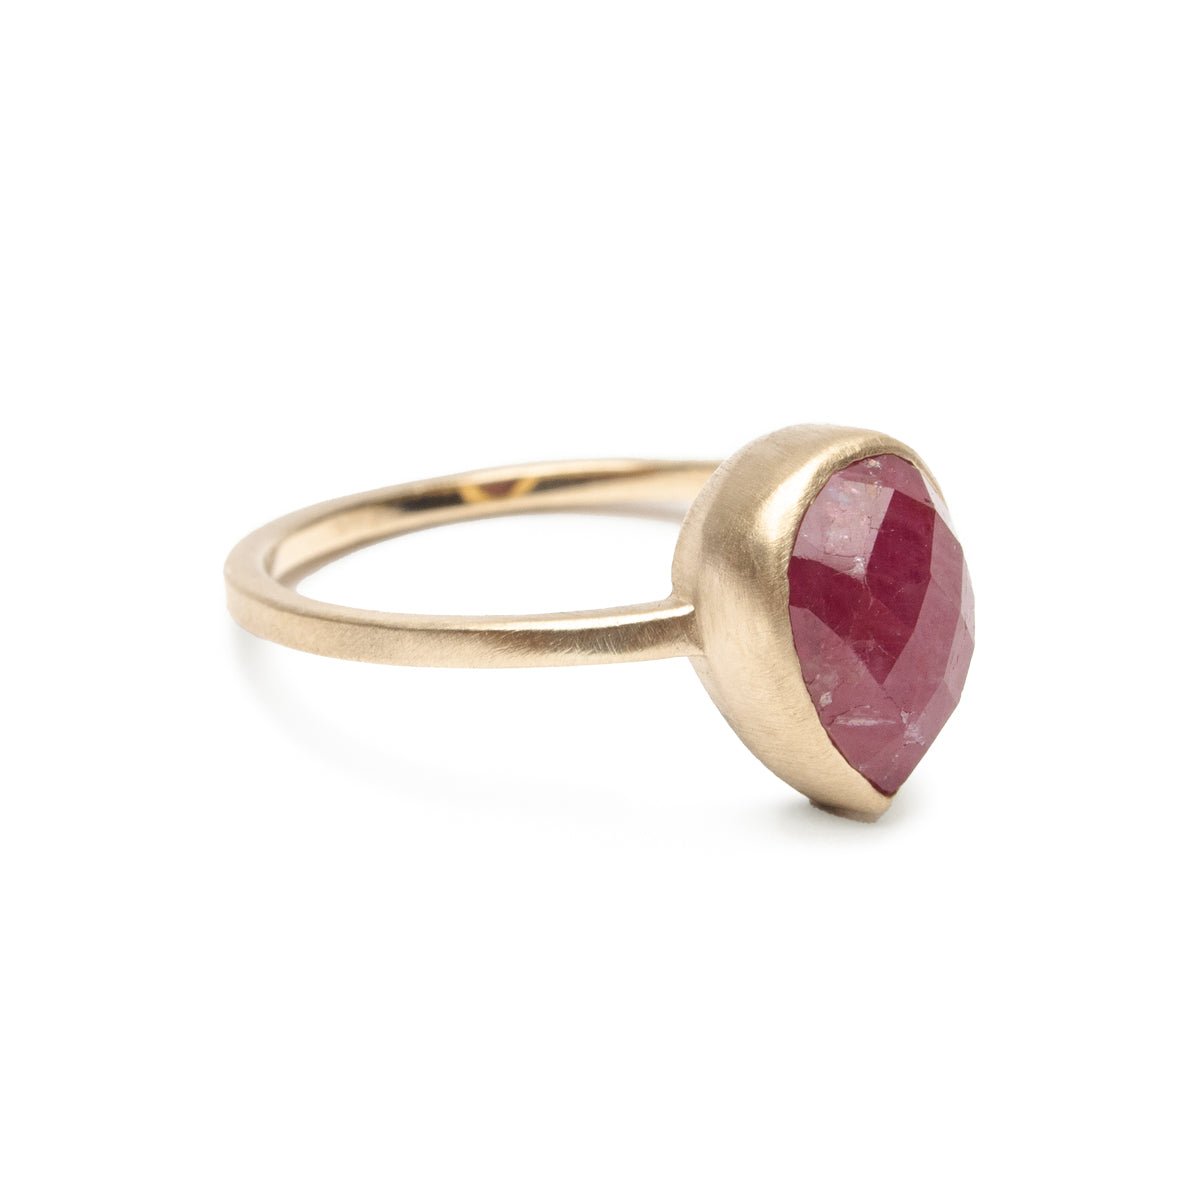 A conflict-free pear-shaped rose cut ruby set in a narrow 14k yellow gold band with a matte finish. The Pirum Ring is designed by Betsy & Iya and handcrafted in Portland, Oregon.